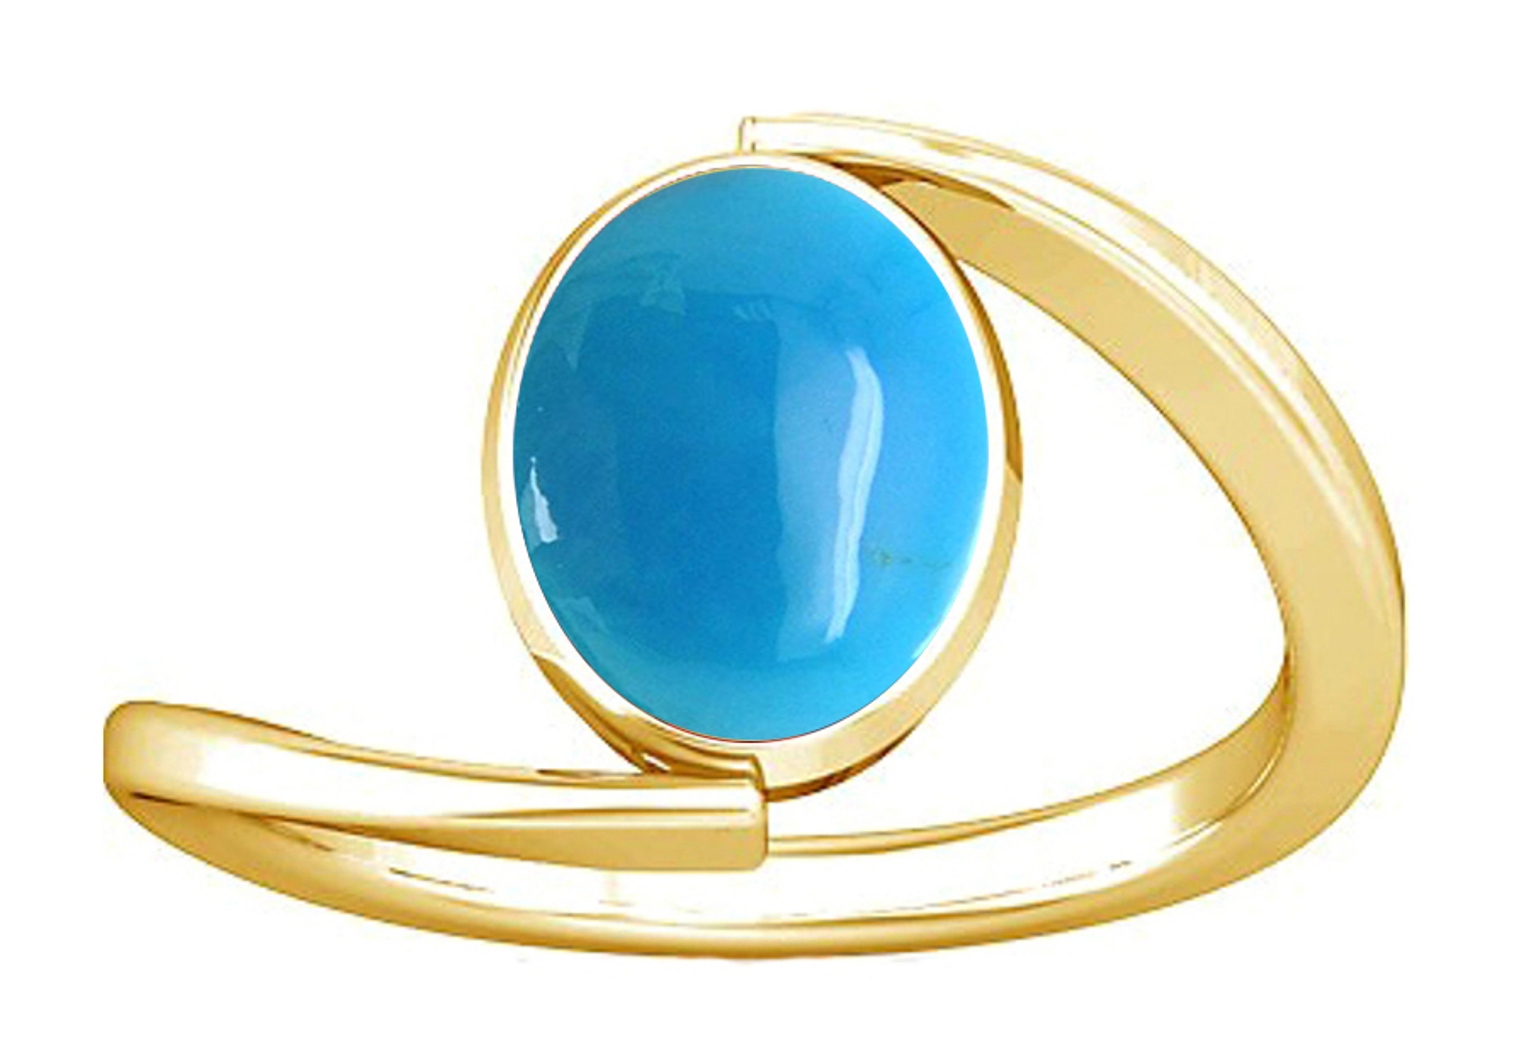 Turquoise Gemstone: Benefits and Who Should Wear It?